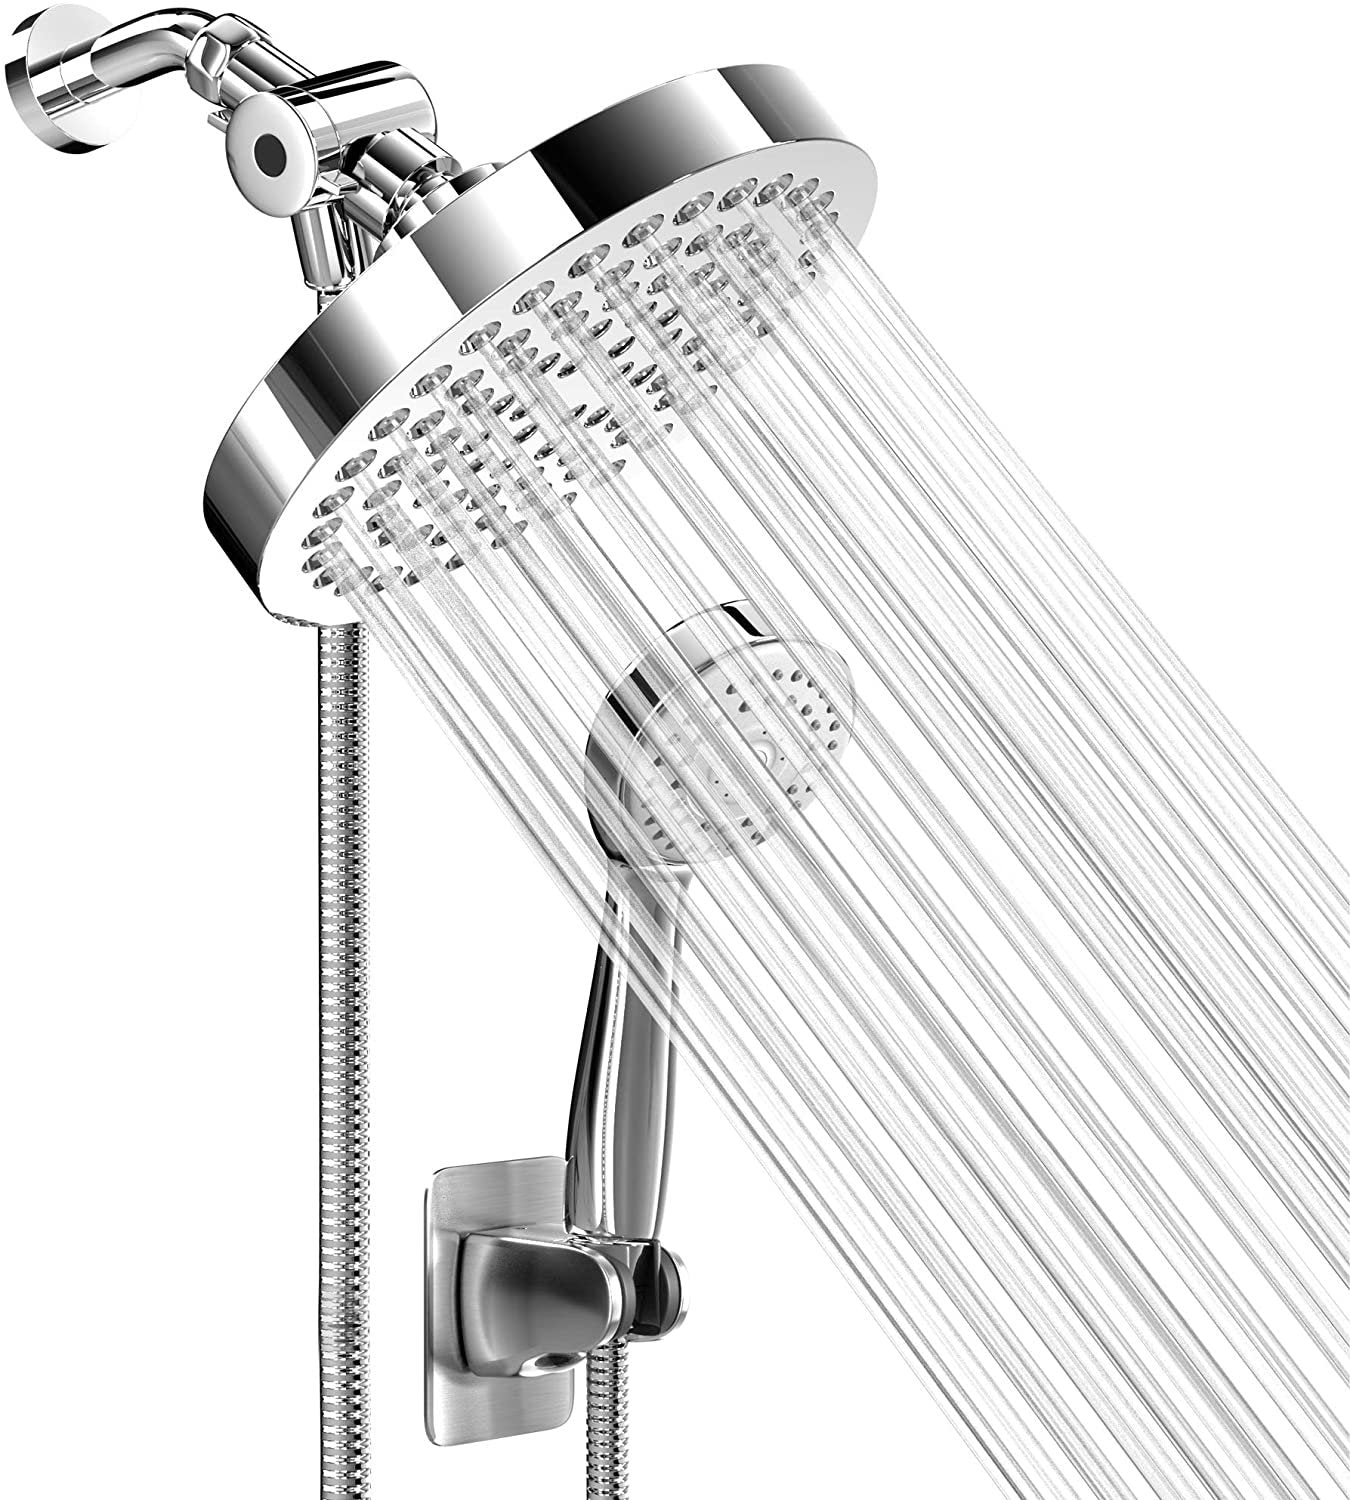 High Pressure Rainfall Shower Head and Hand Held Shower Head Combo with 70 Inch Hose for Bath and Adjustable Swivel Head - 2.5 GPM - Easy Install Anti Clog Jet Nozzles - Universal Fit for High